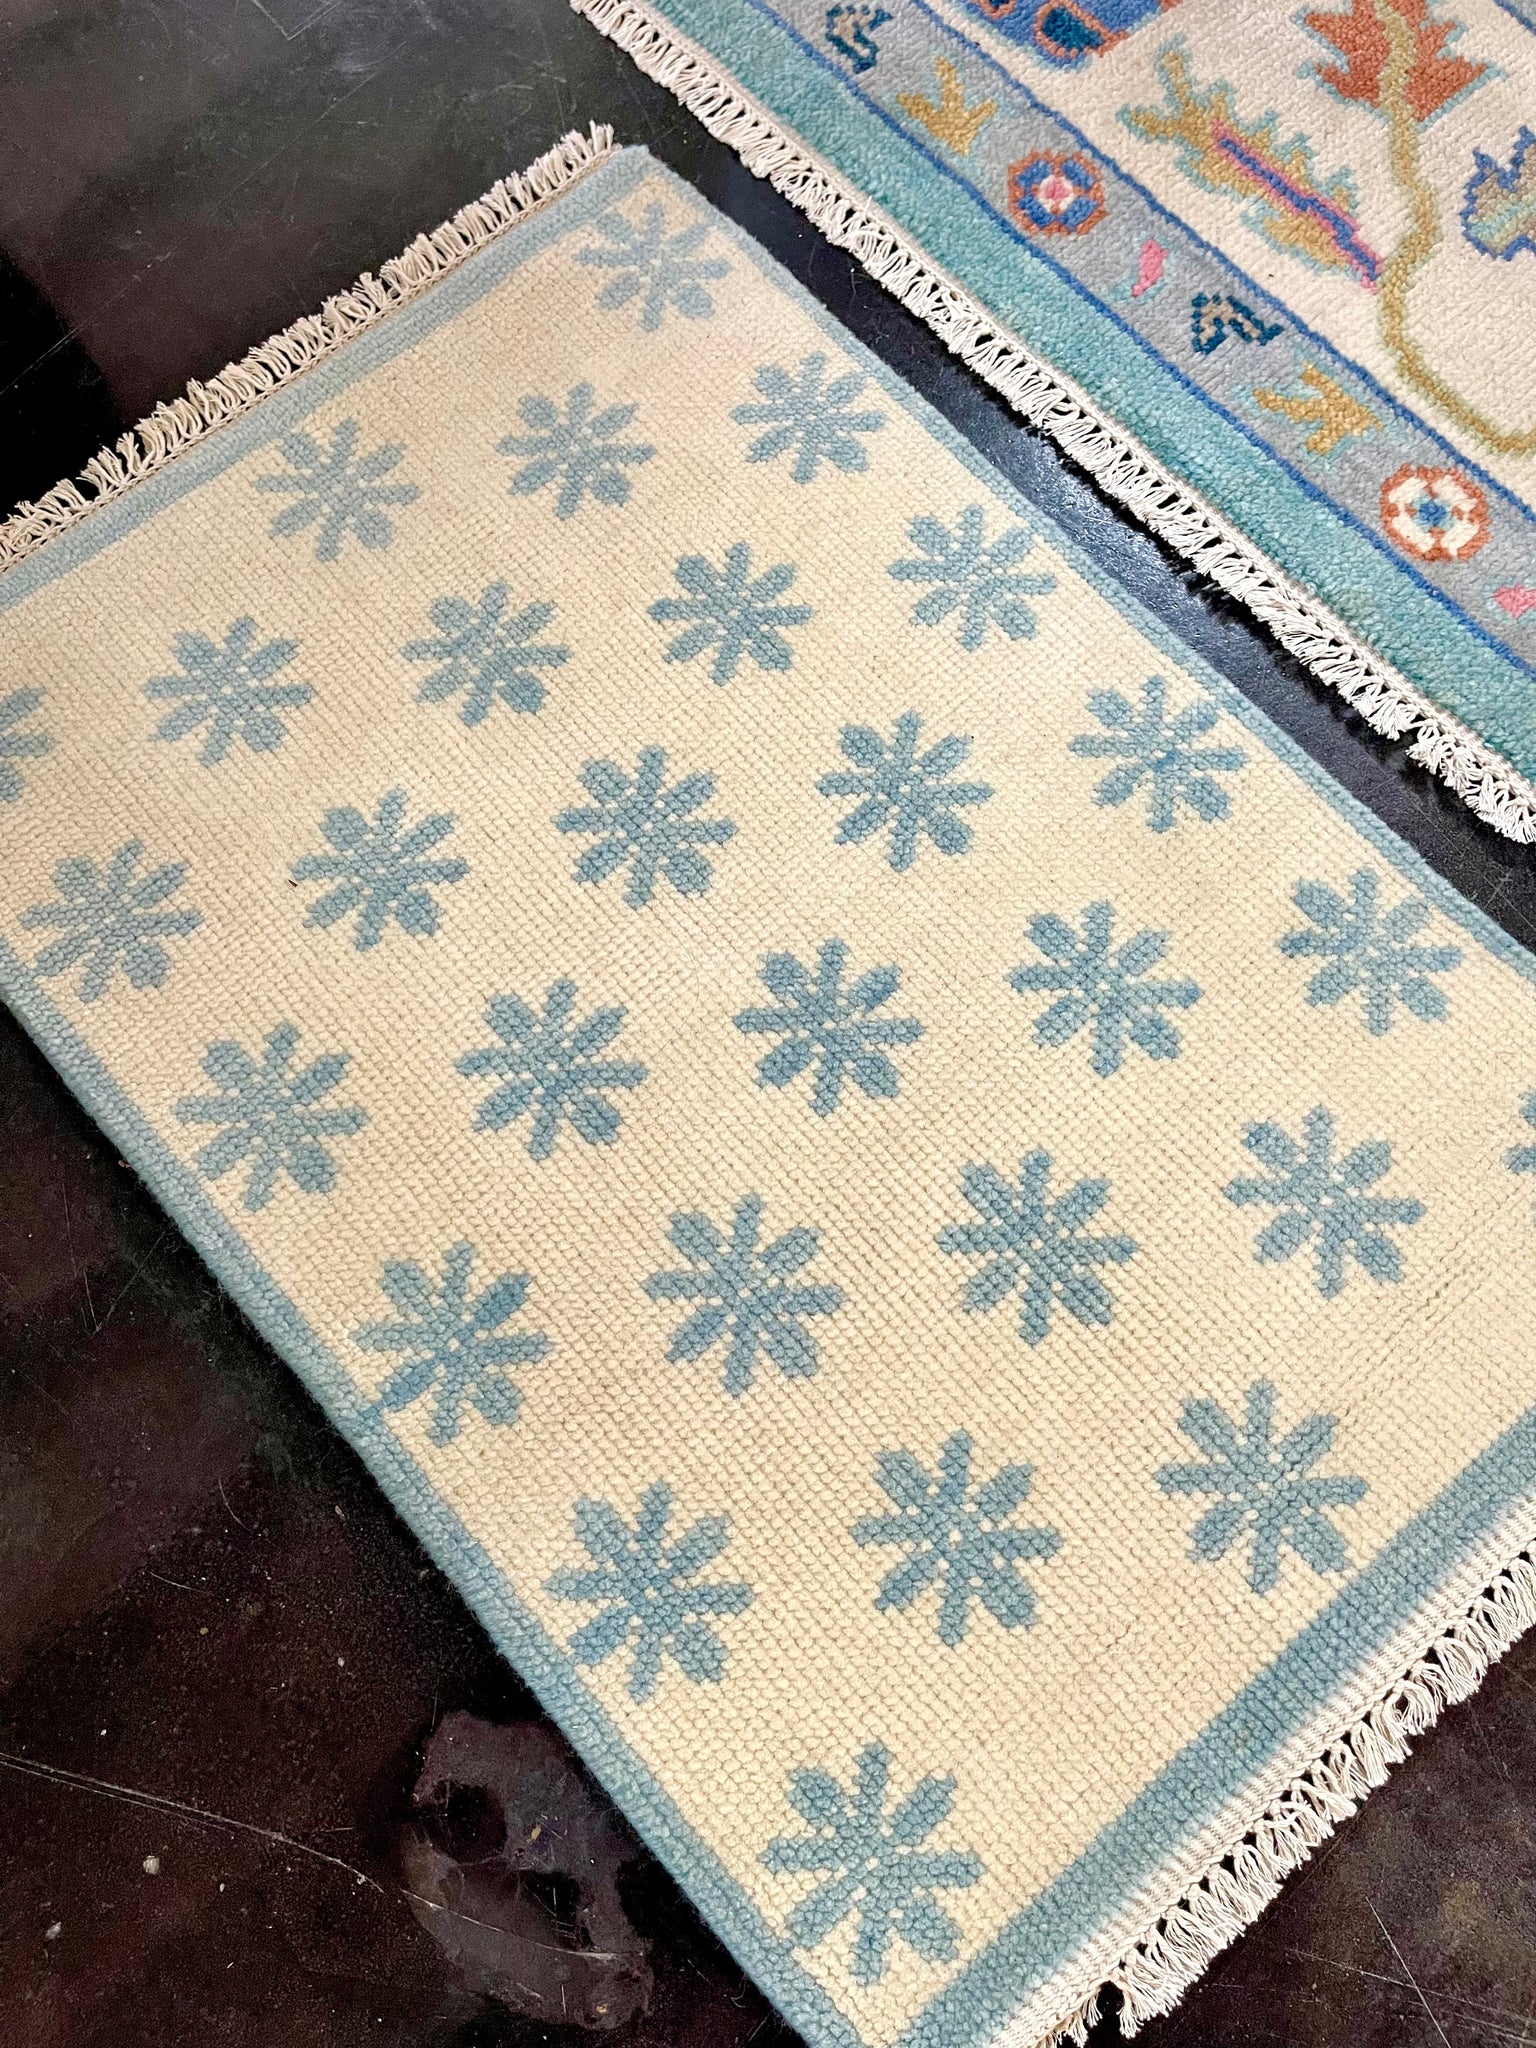 Turquoise and White Floral 2’x3’ Rug Available and Ready to Ship!